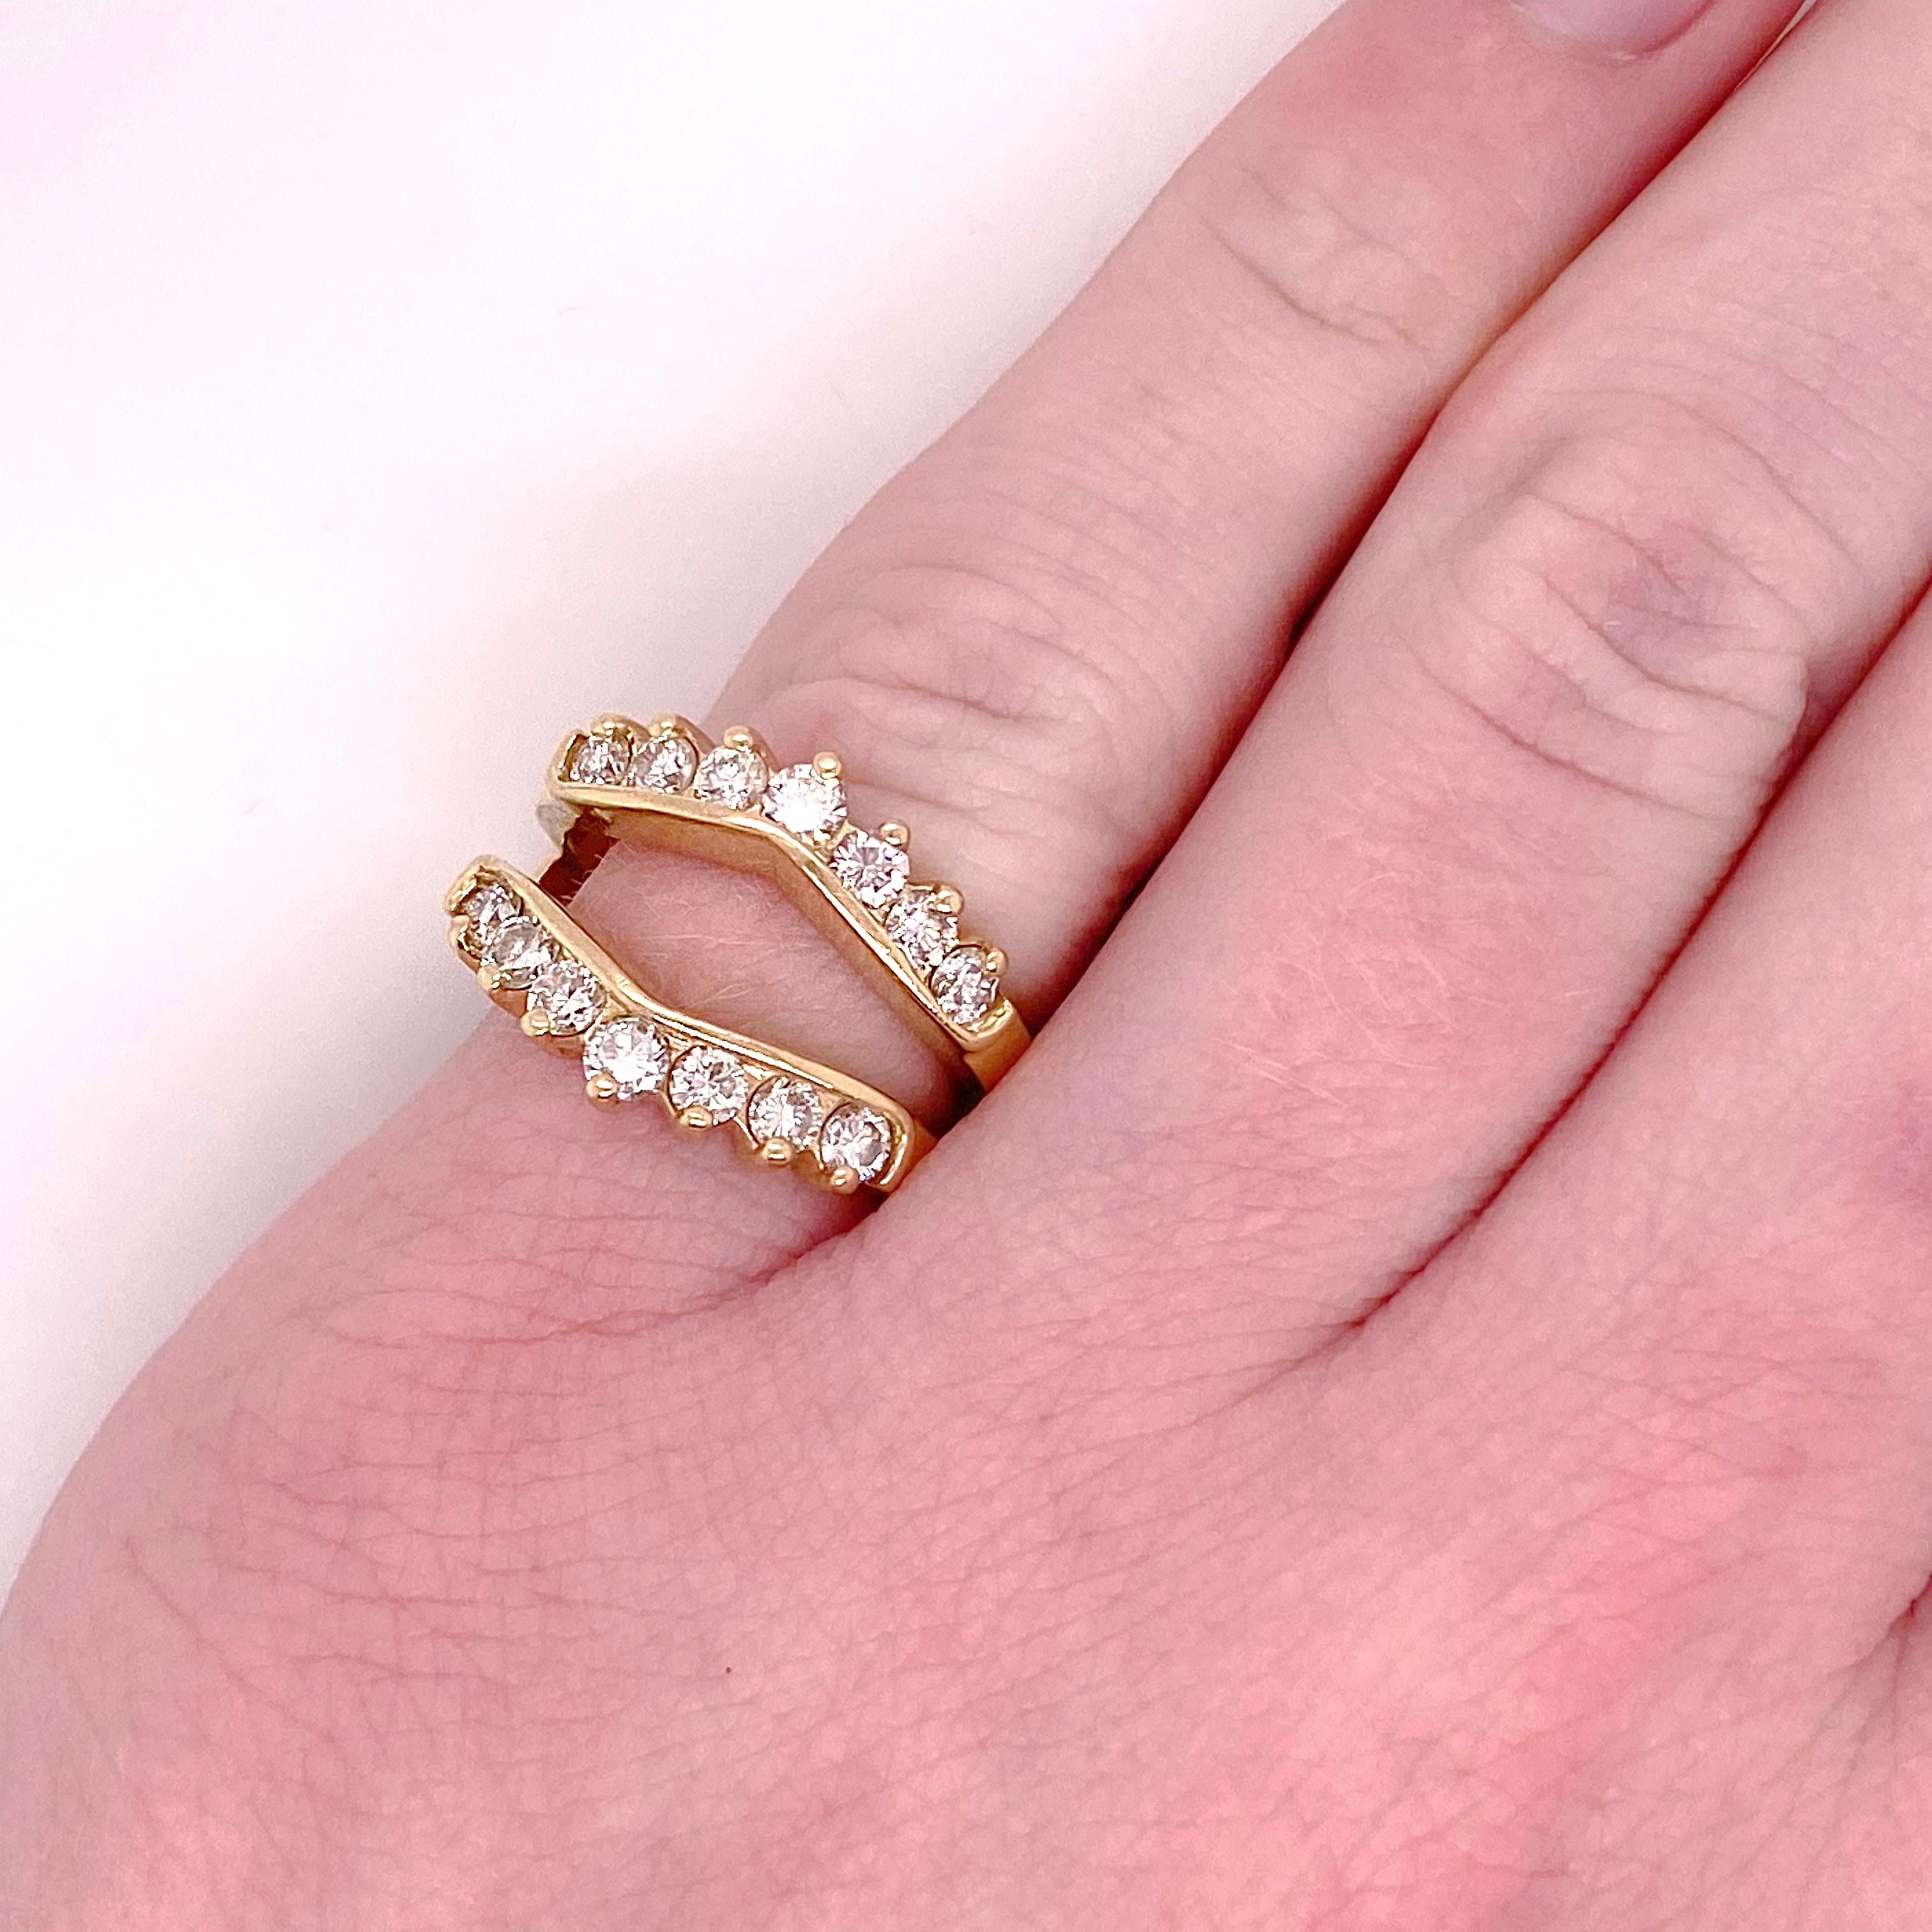 NATURAL AND GENUINE DIAMOND RING ENHANCER! Perfect for a solitaire ring or a straight line engagement ring. There are 14 diamonds in the enhancer and they have a total of 1.12 carats of diamonds.  The diamonds are good quality as they are eye clean